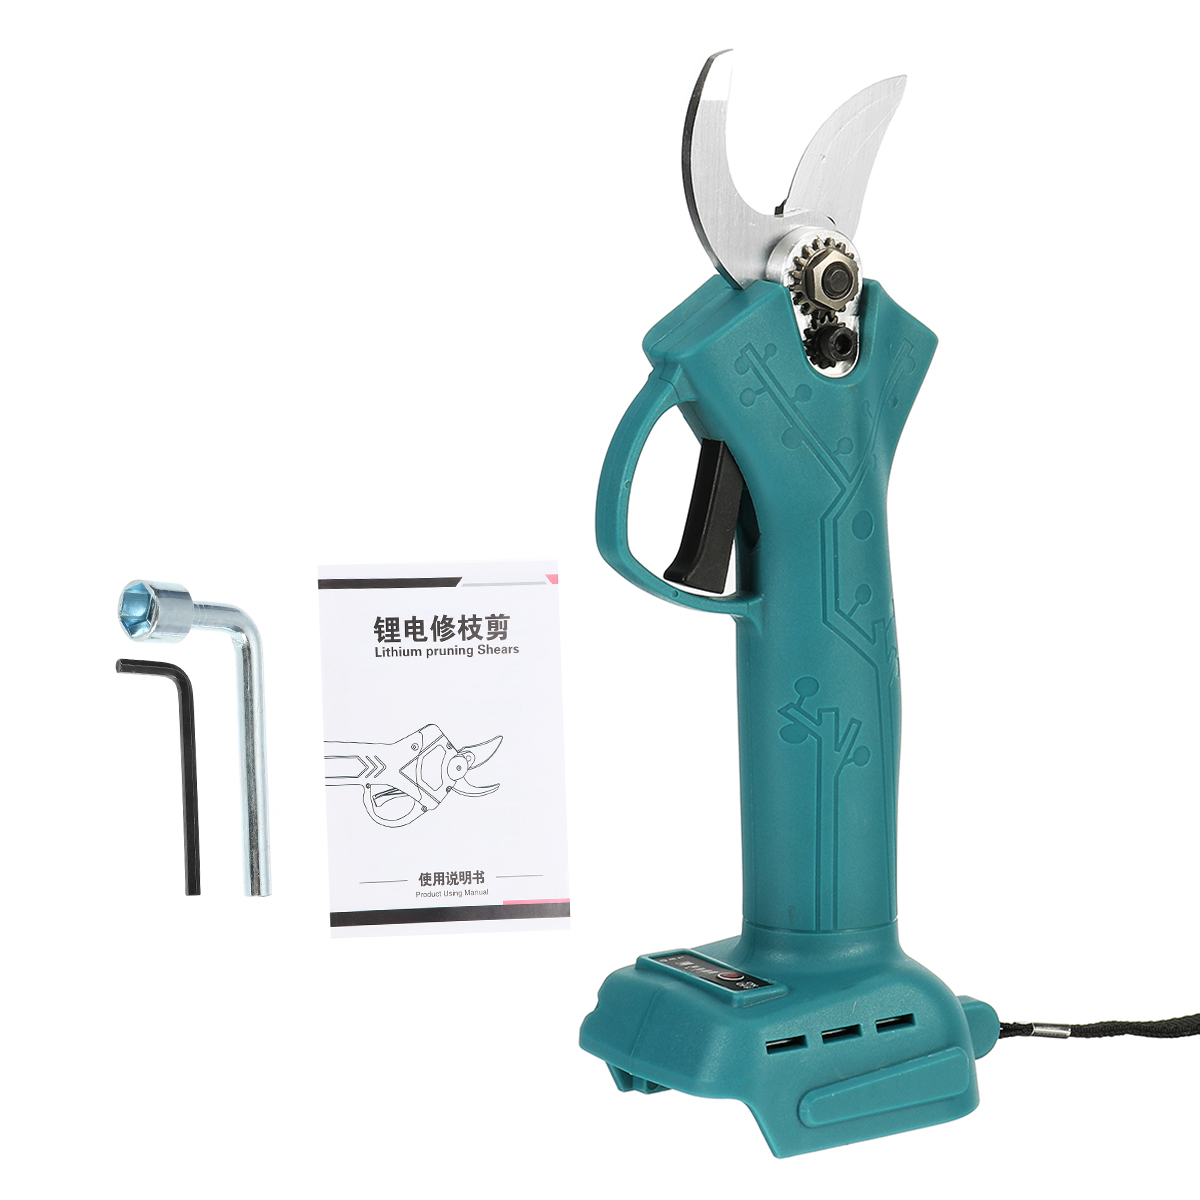 2530mm-Cordless-Electric-Branch-Scissors-Shear-Pruning-Cutter-Tool-Trimmer-For-WorxMakita-18V-21V-Ba-1816478-12